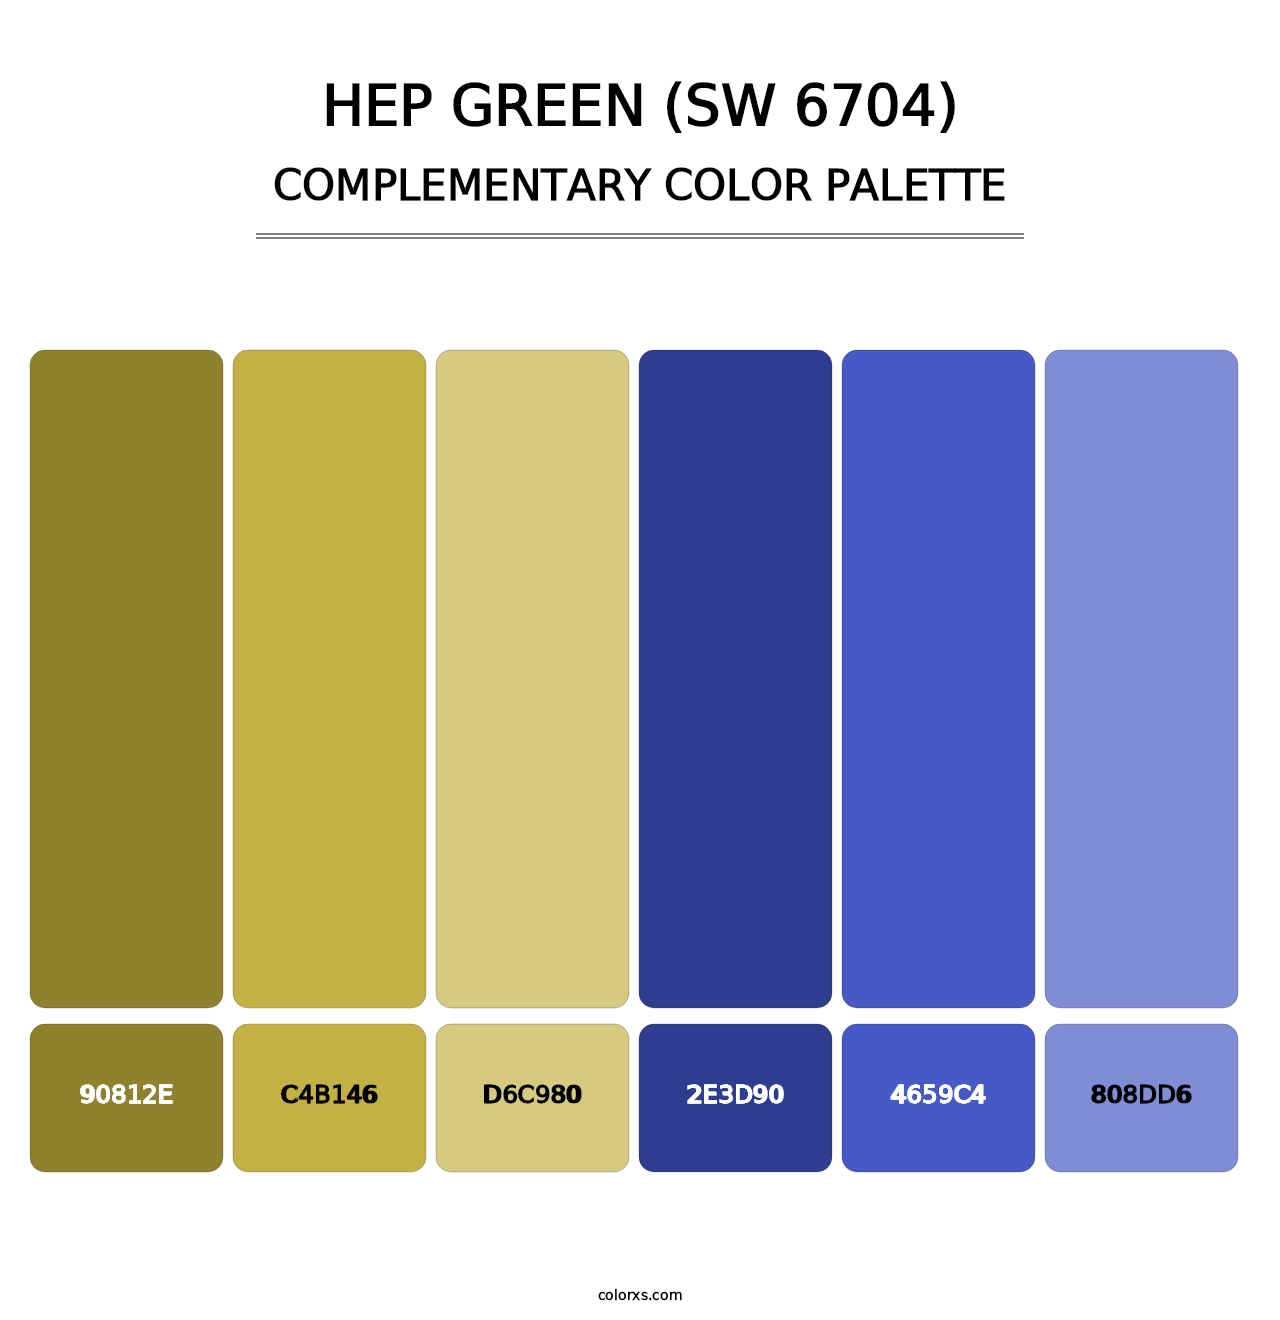 Hep Green (SW 6704) - Complementary Color Palette